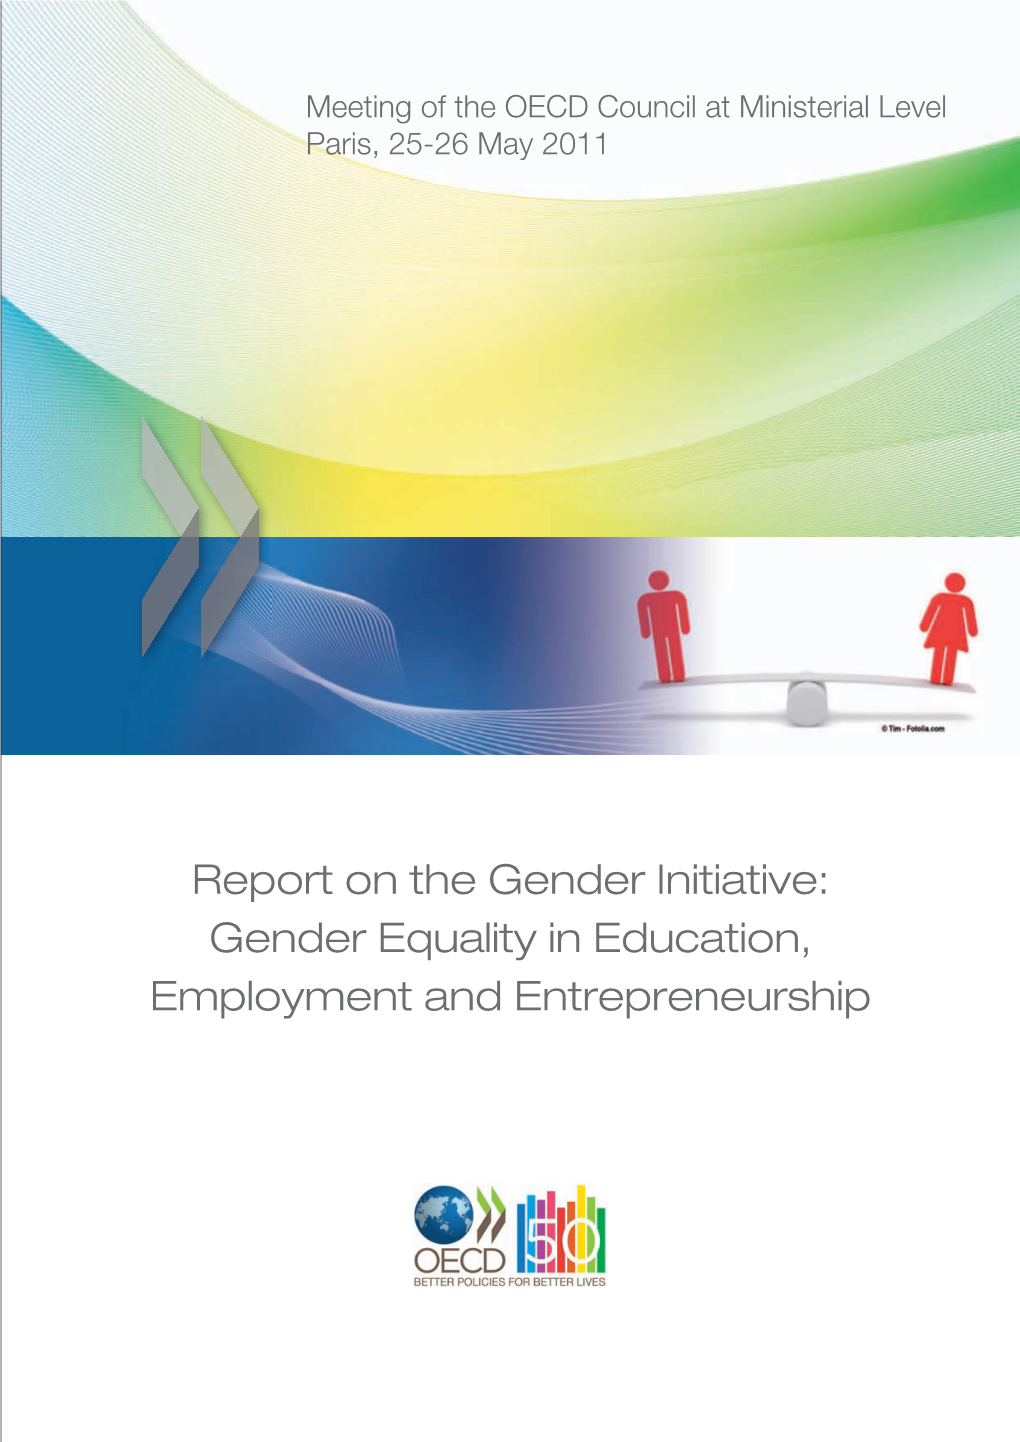 Gender Equality in Education, Employment and Entrepreneurship (The “Three Es”)